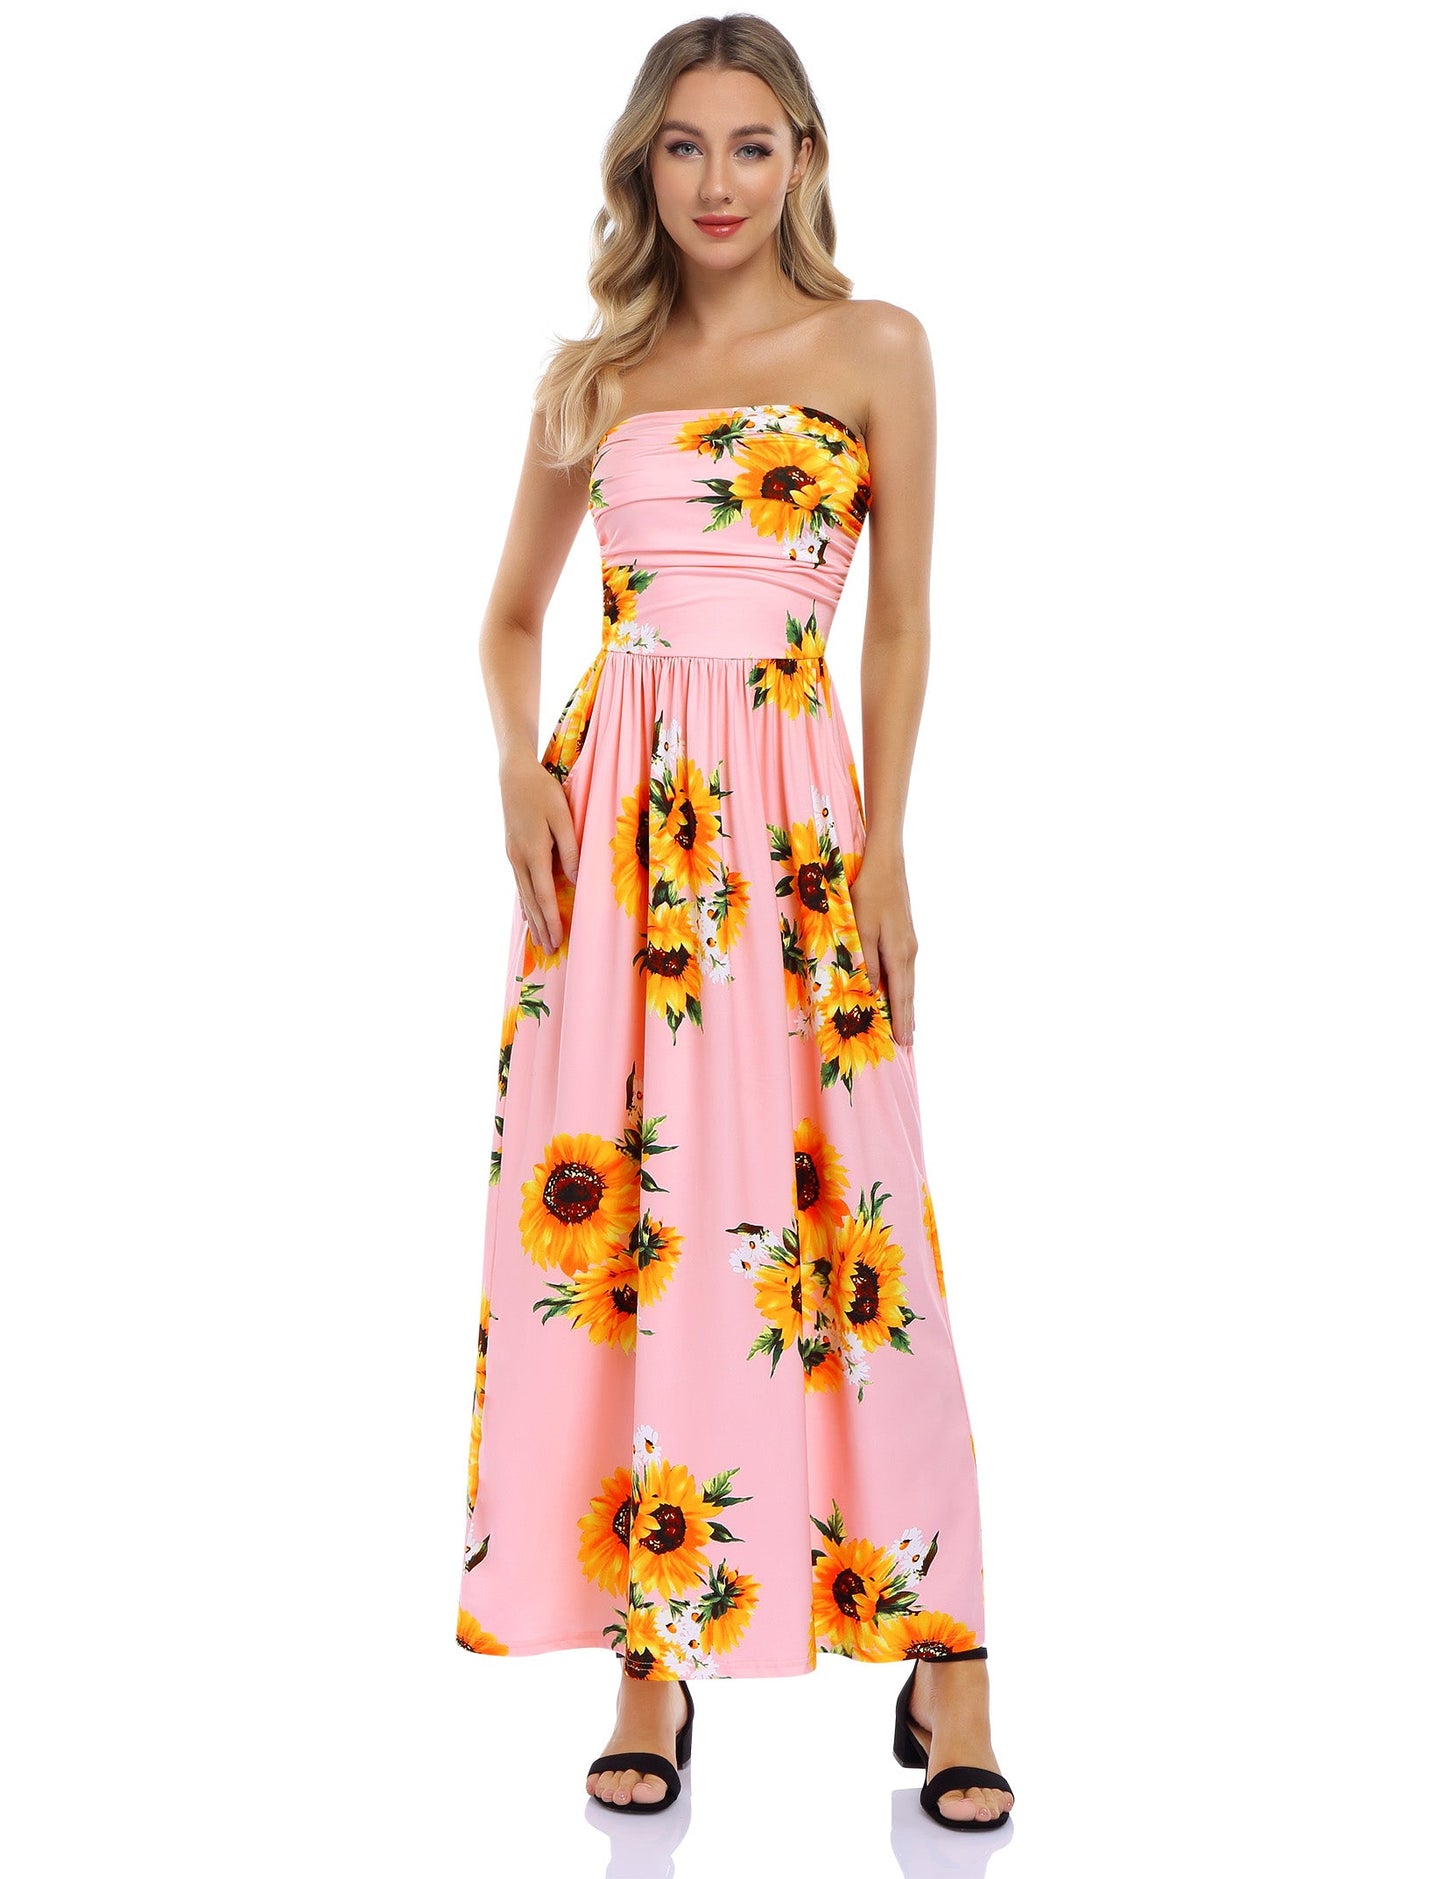 YESFASHION Women's Strapless Graceful Floral Party Maxi Long Dress Black